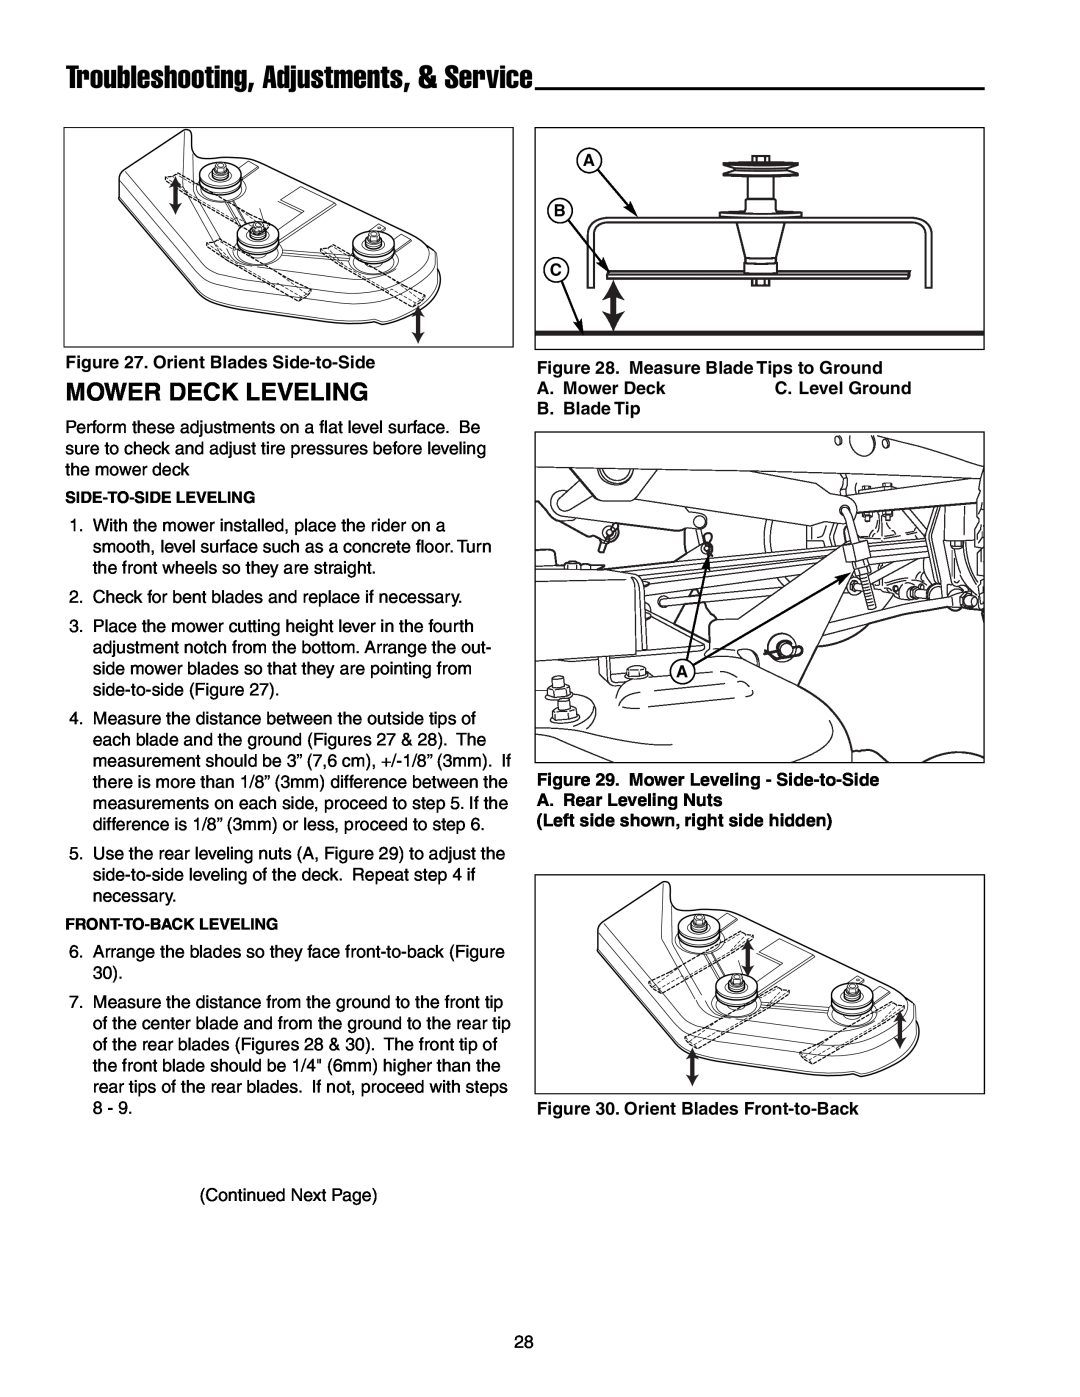 Simplicity 7800071 Mower Deck Leveling, Troubleshooting, Adjustments, & Service, Orient Blades Side-to-Side, Blade Tip 